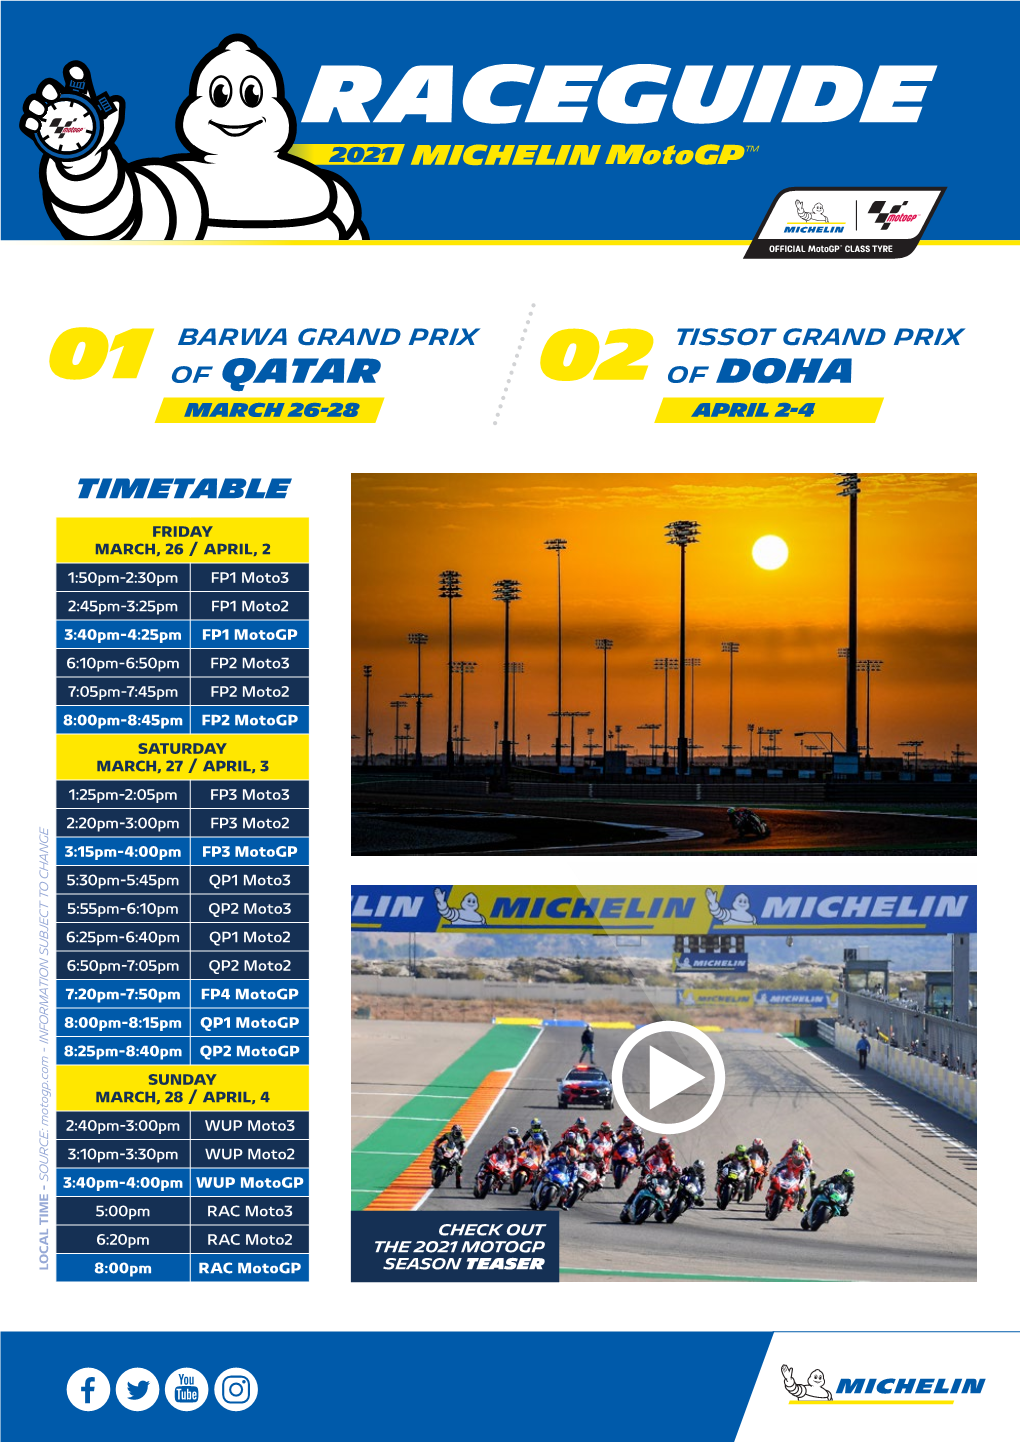 Motogp™ of Two New Motogp™ Records for Losail: 3 up to 4 Power Slick Hard Range in Depth